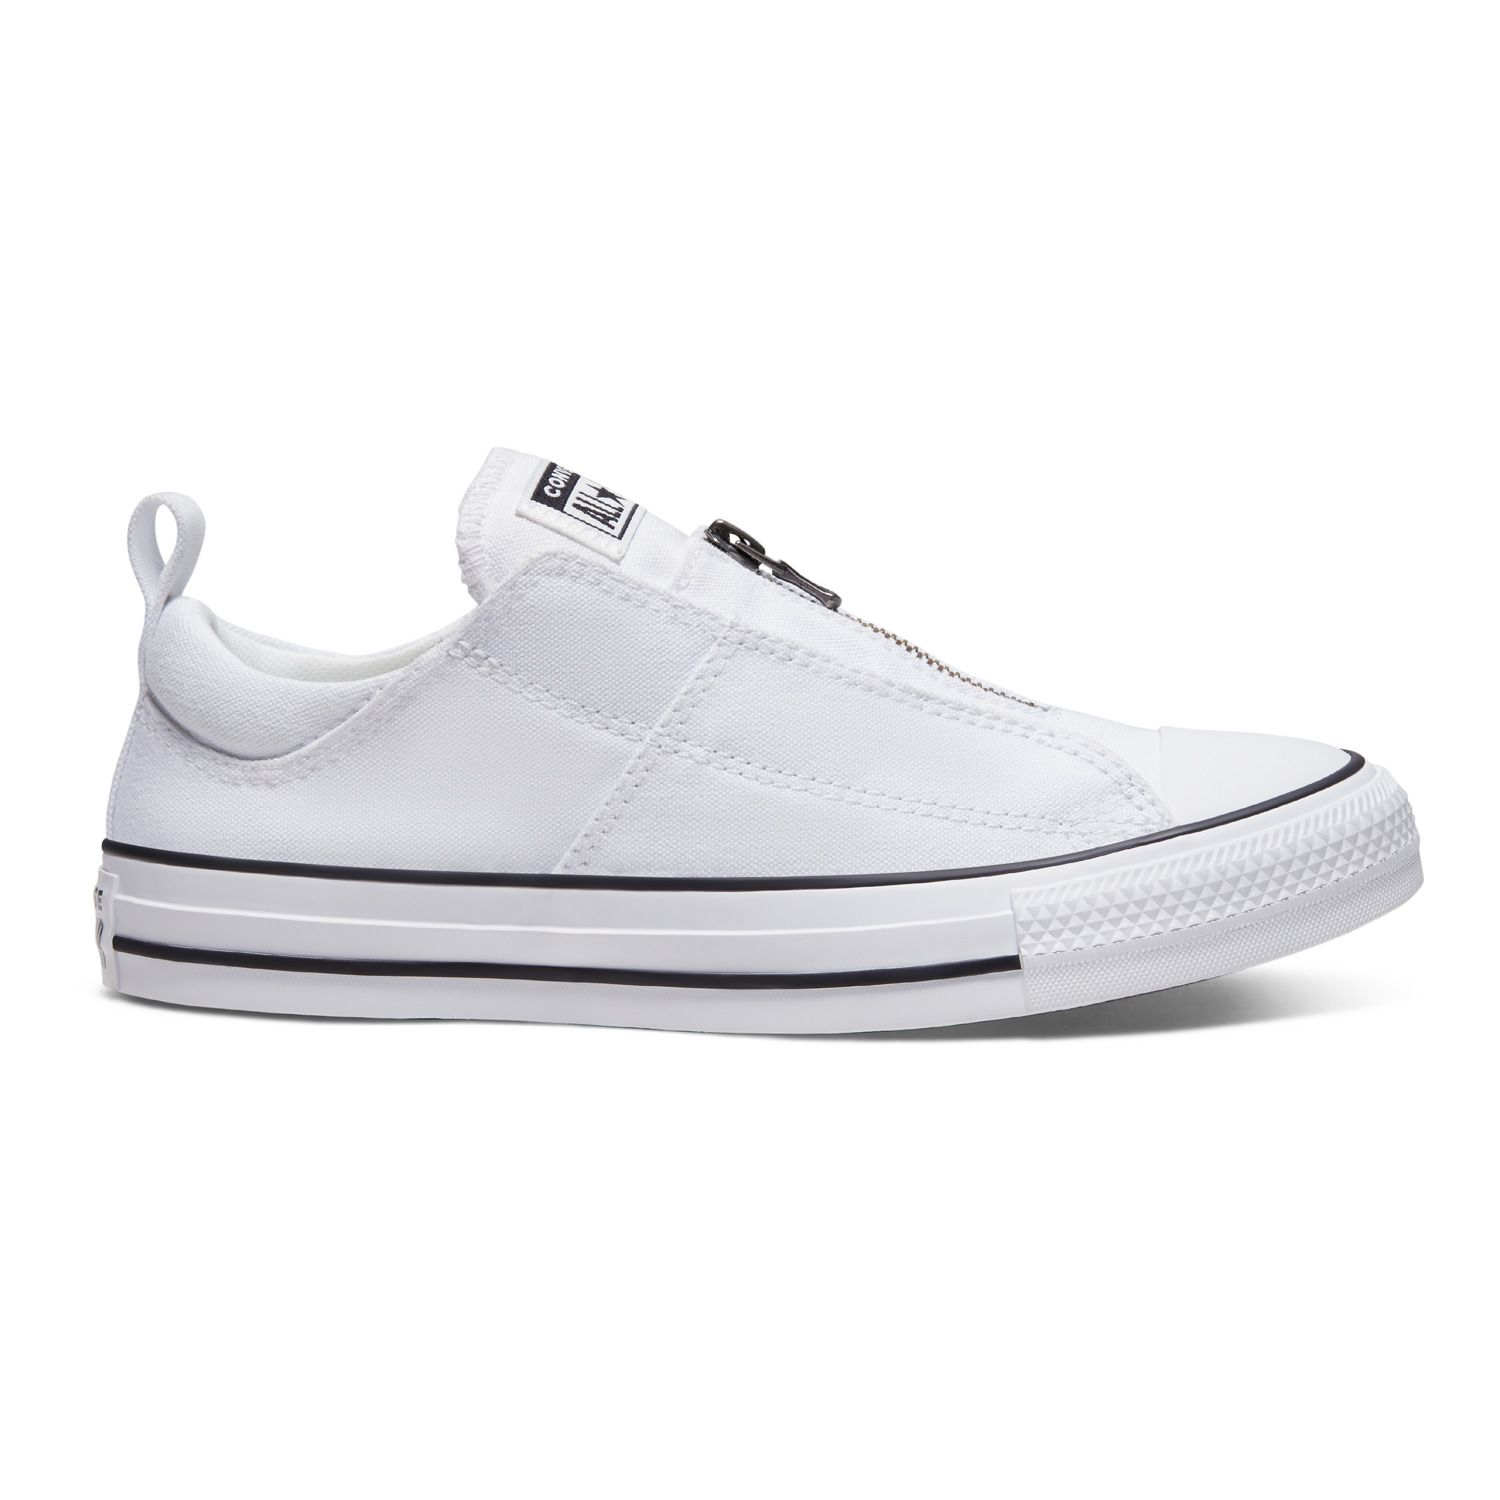 converse chuck taylor all star madison low top